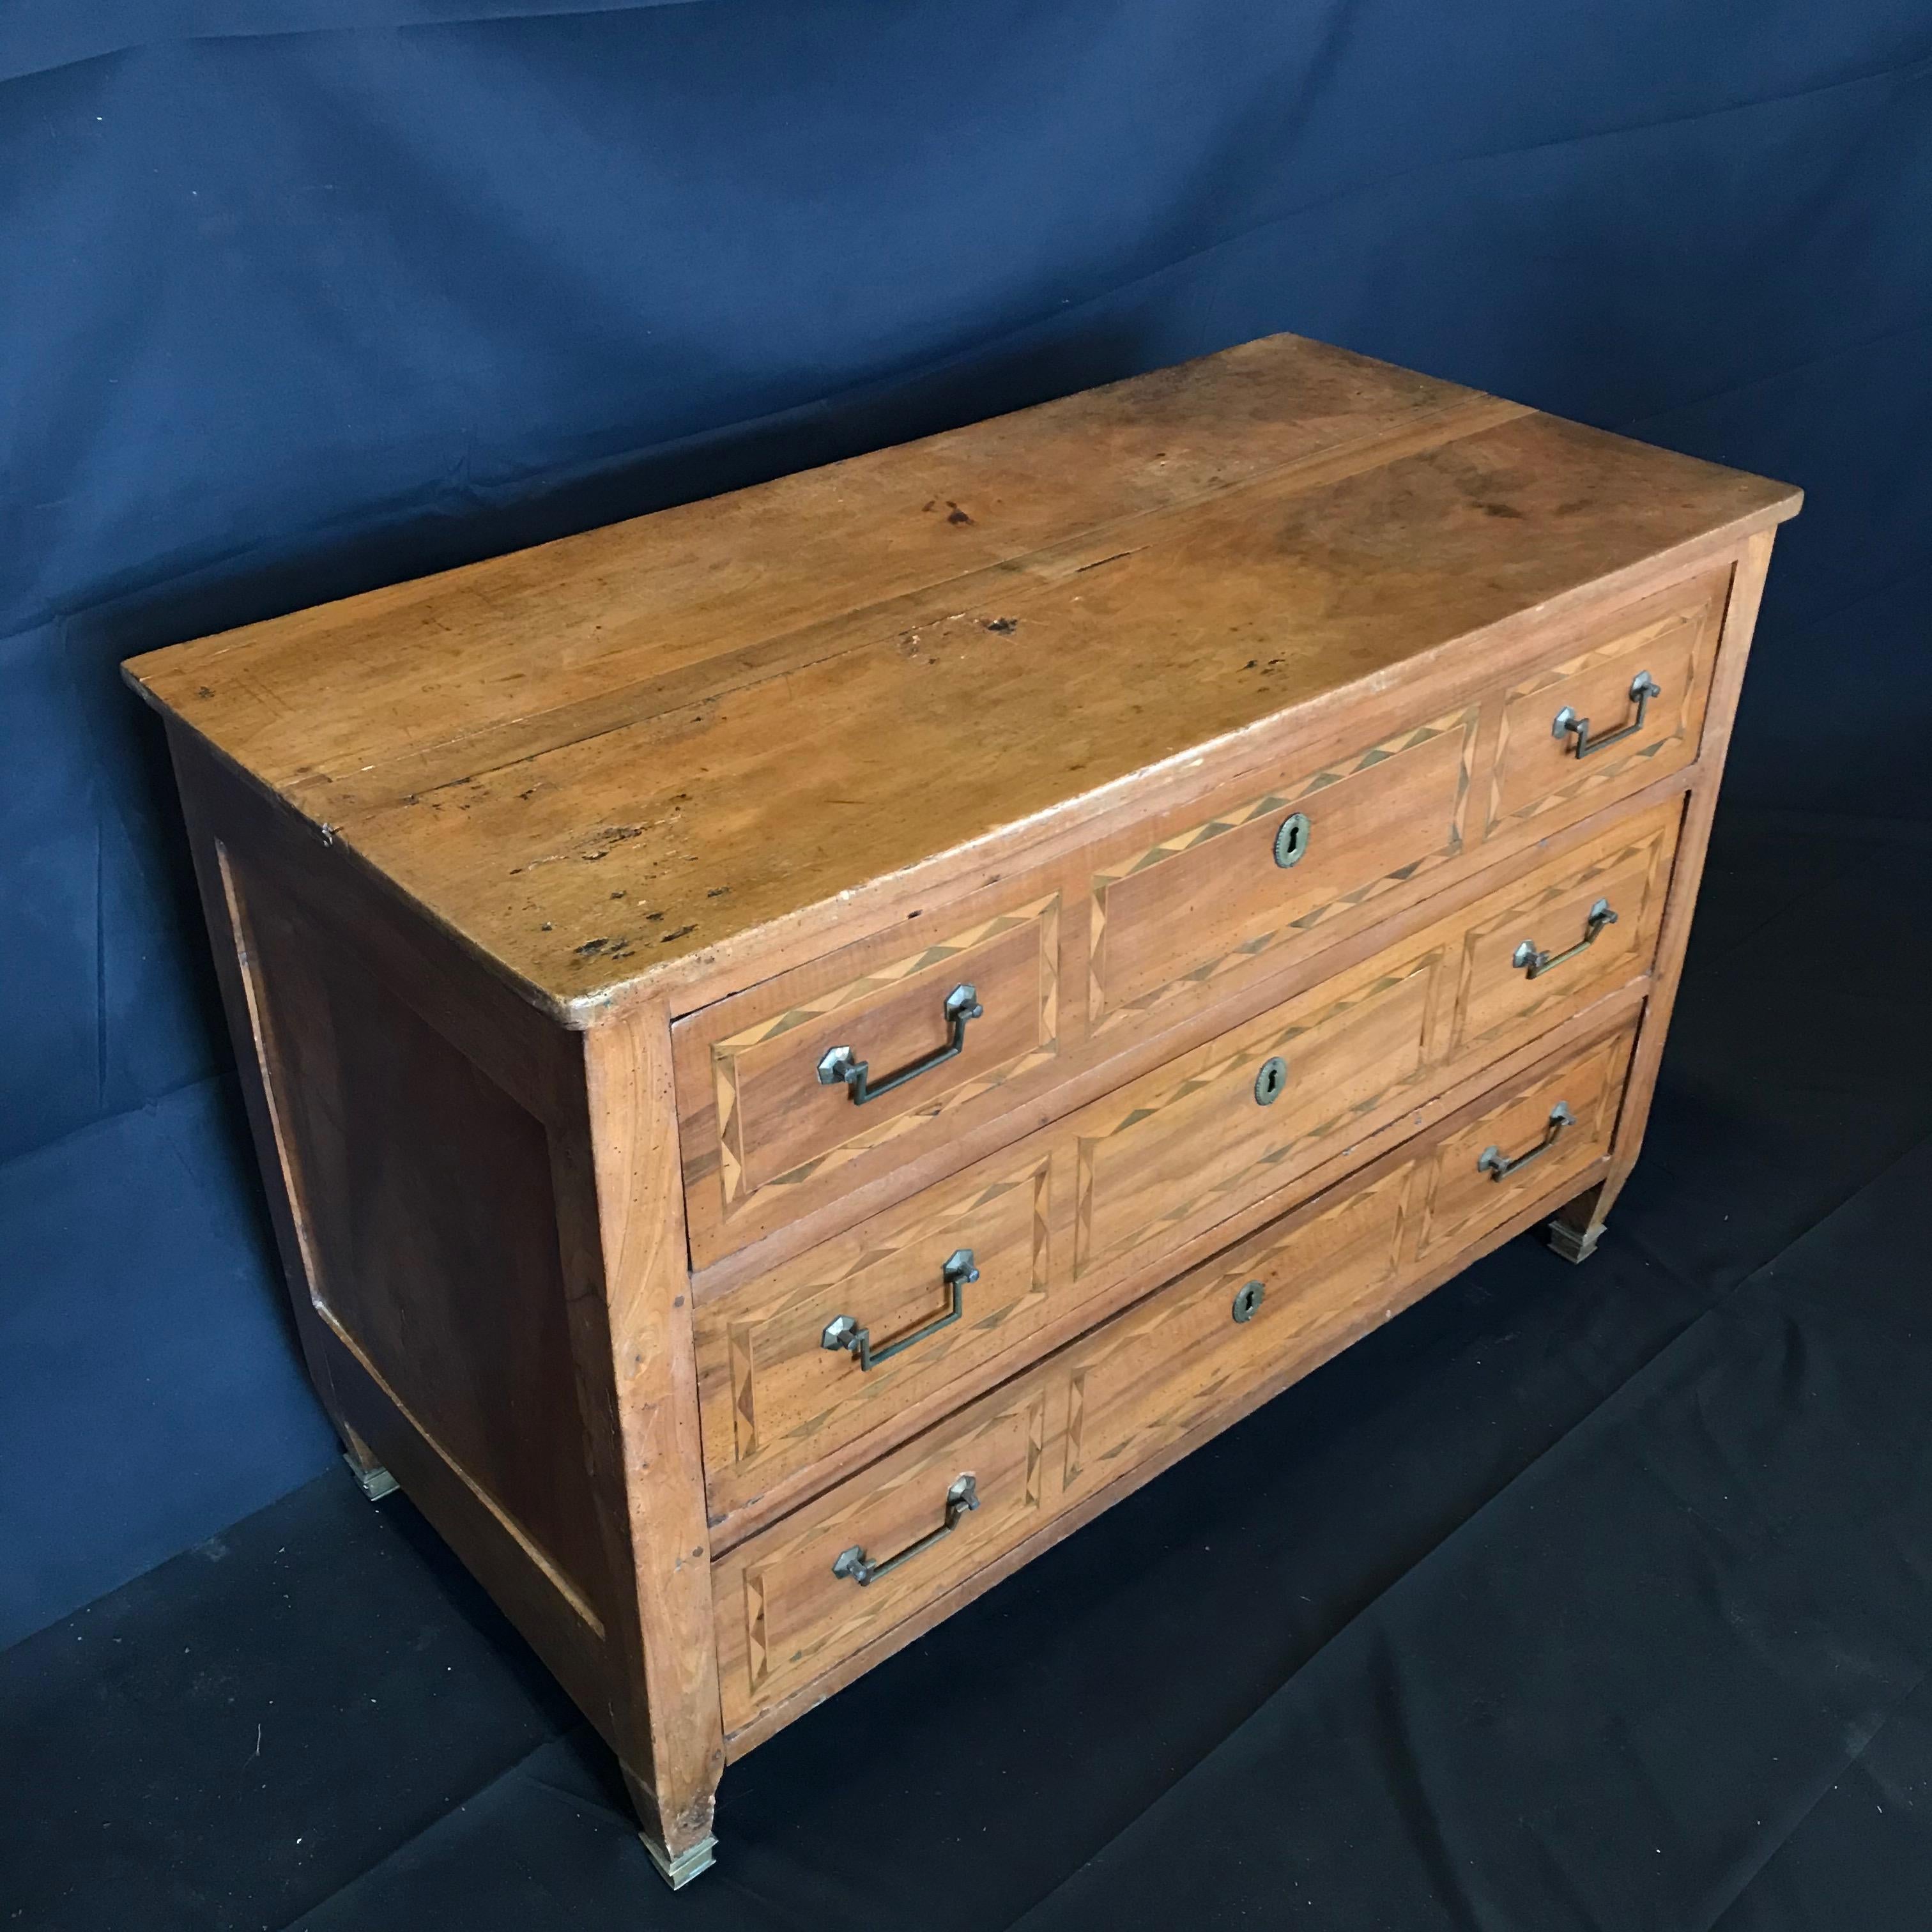 Wonderful antique French Louis XVI period walnut marquetry commode having three drawers and beautiful patina. The interior of the three drawers is oak. The work of marquetry is in walnut, with some parts dyed in ebony. There are original bronze